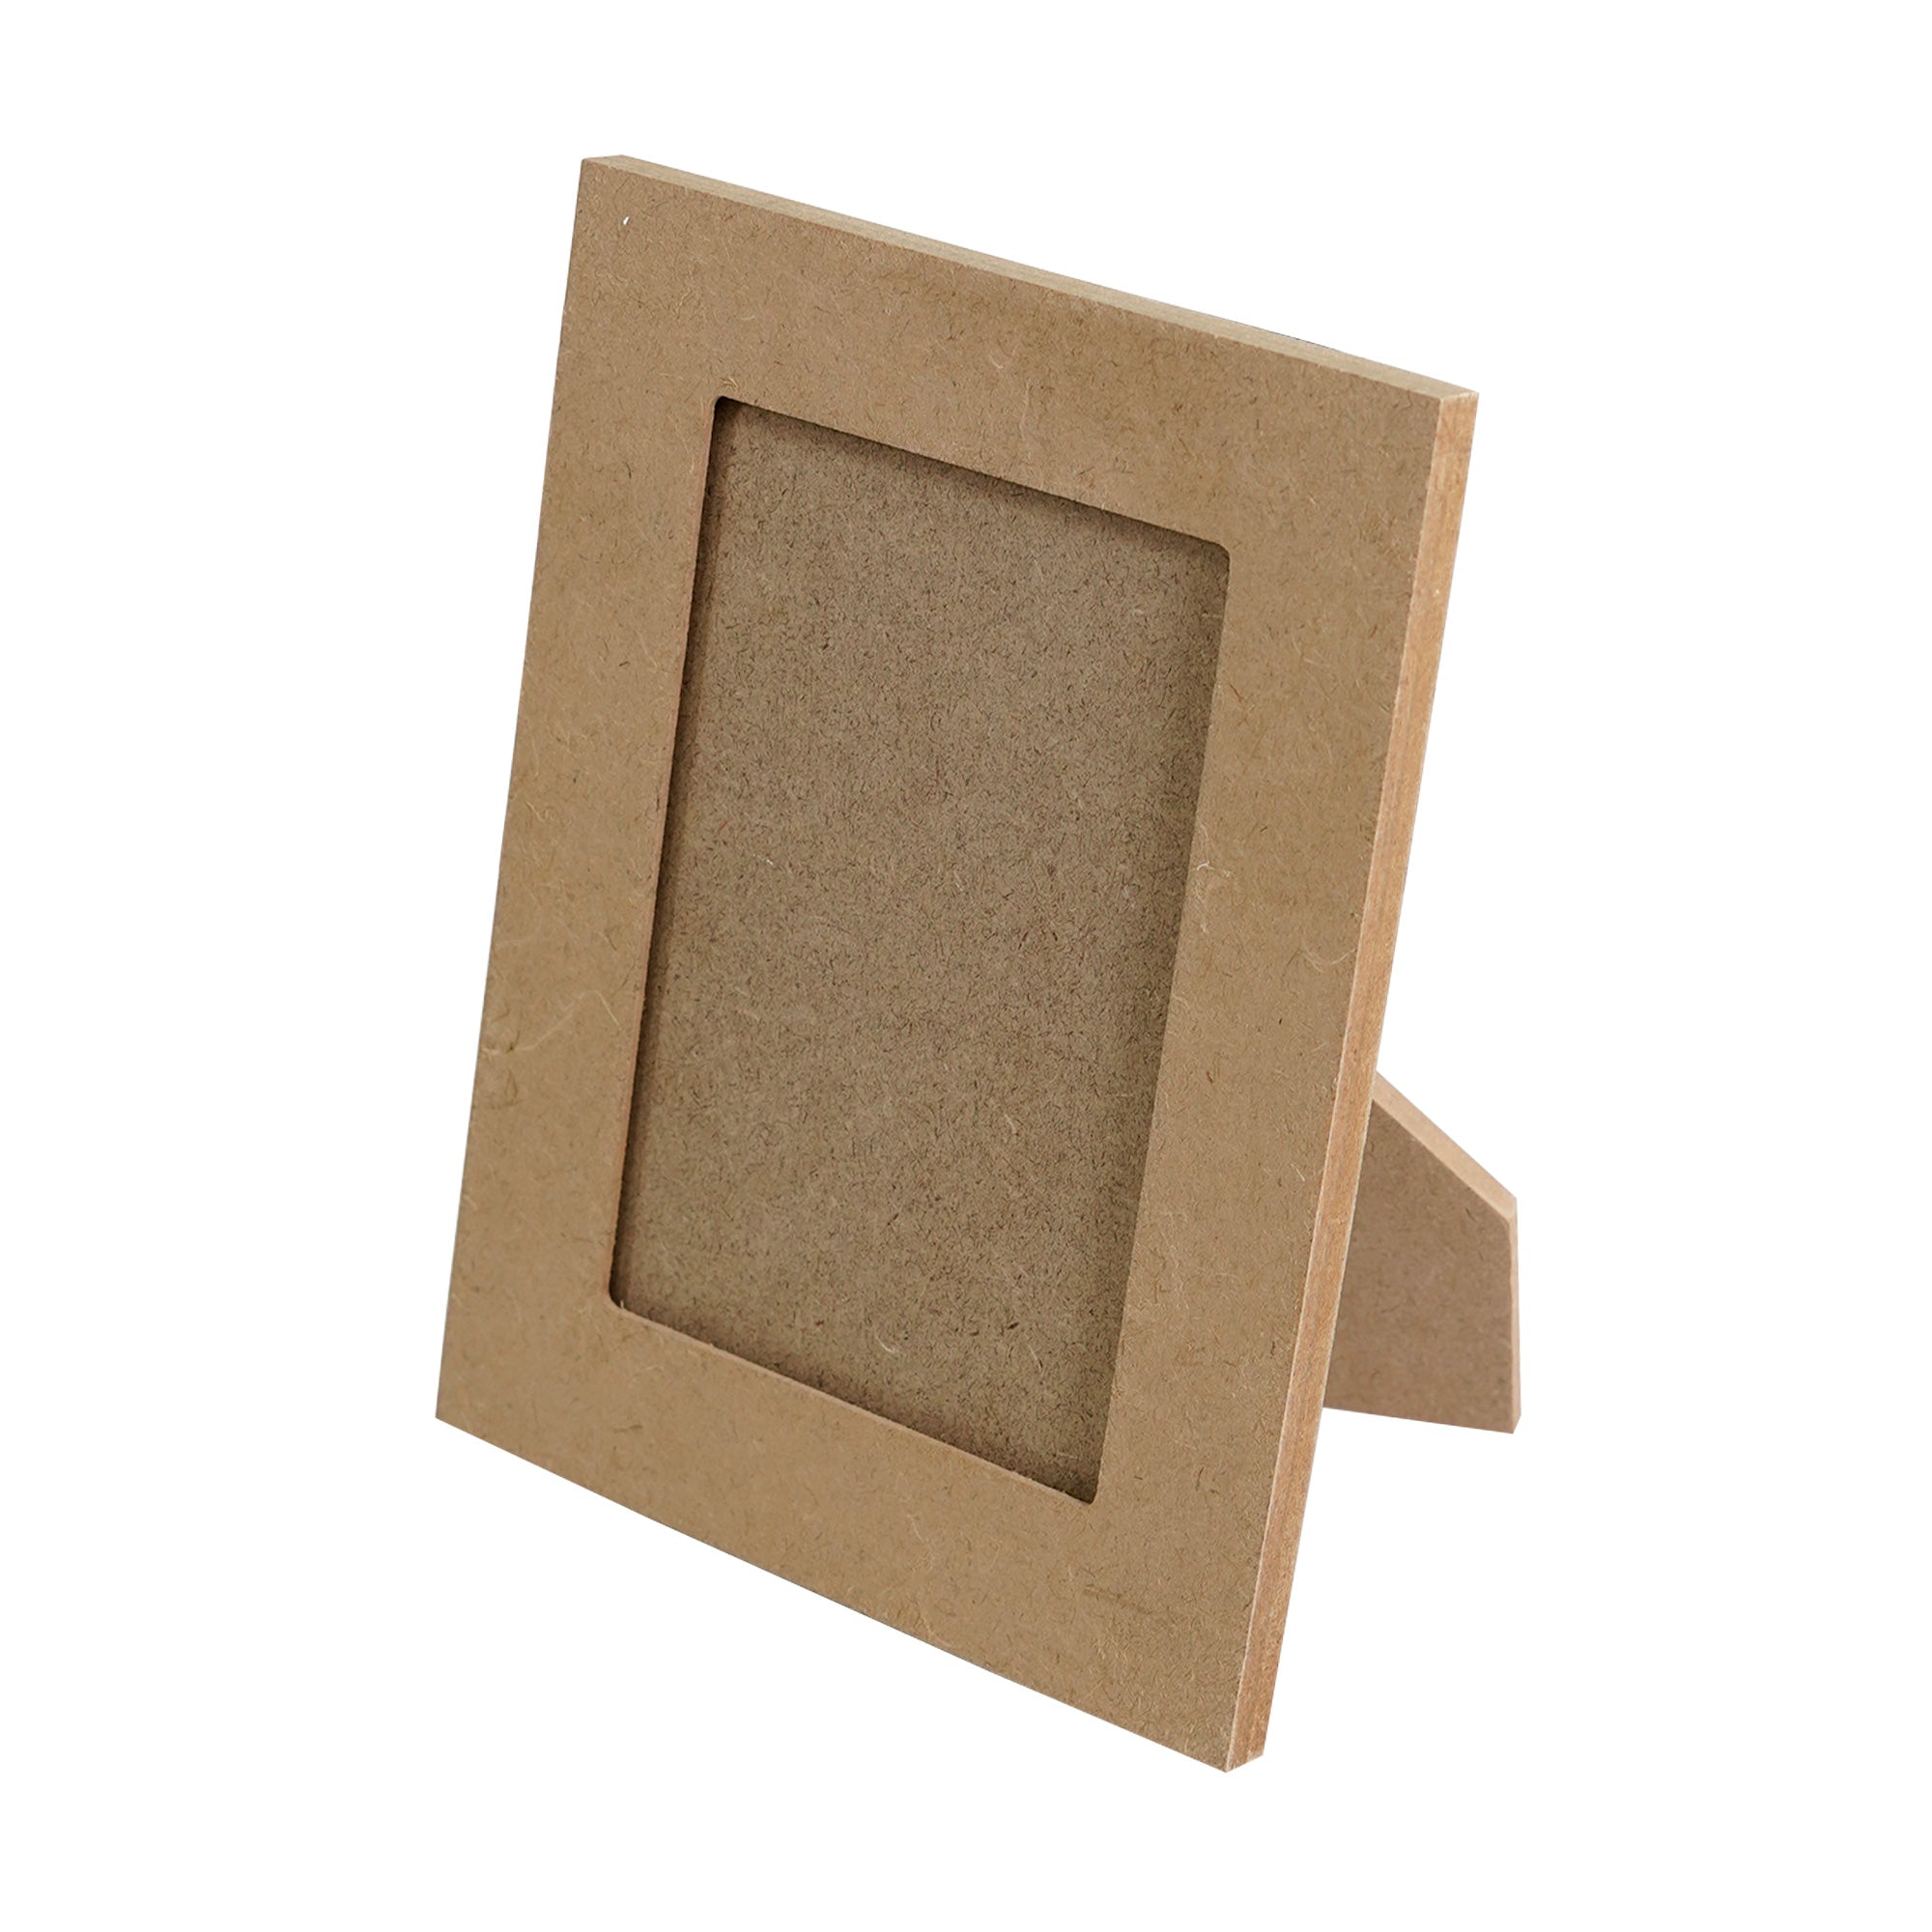 Mdf Photo Frame With Stand 4 X 6Inch 5.5Mm Thick 1Pc Lb